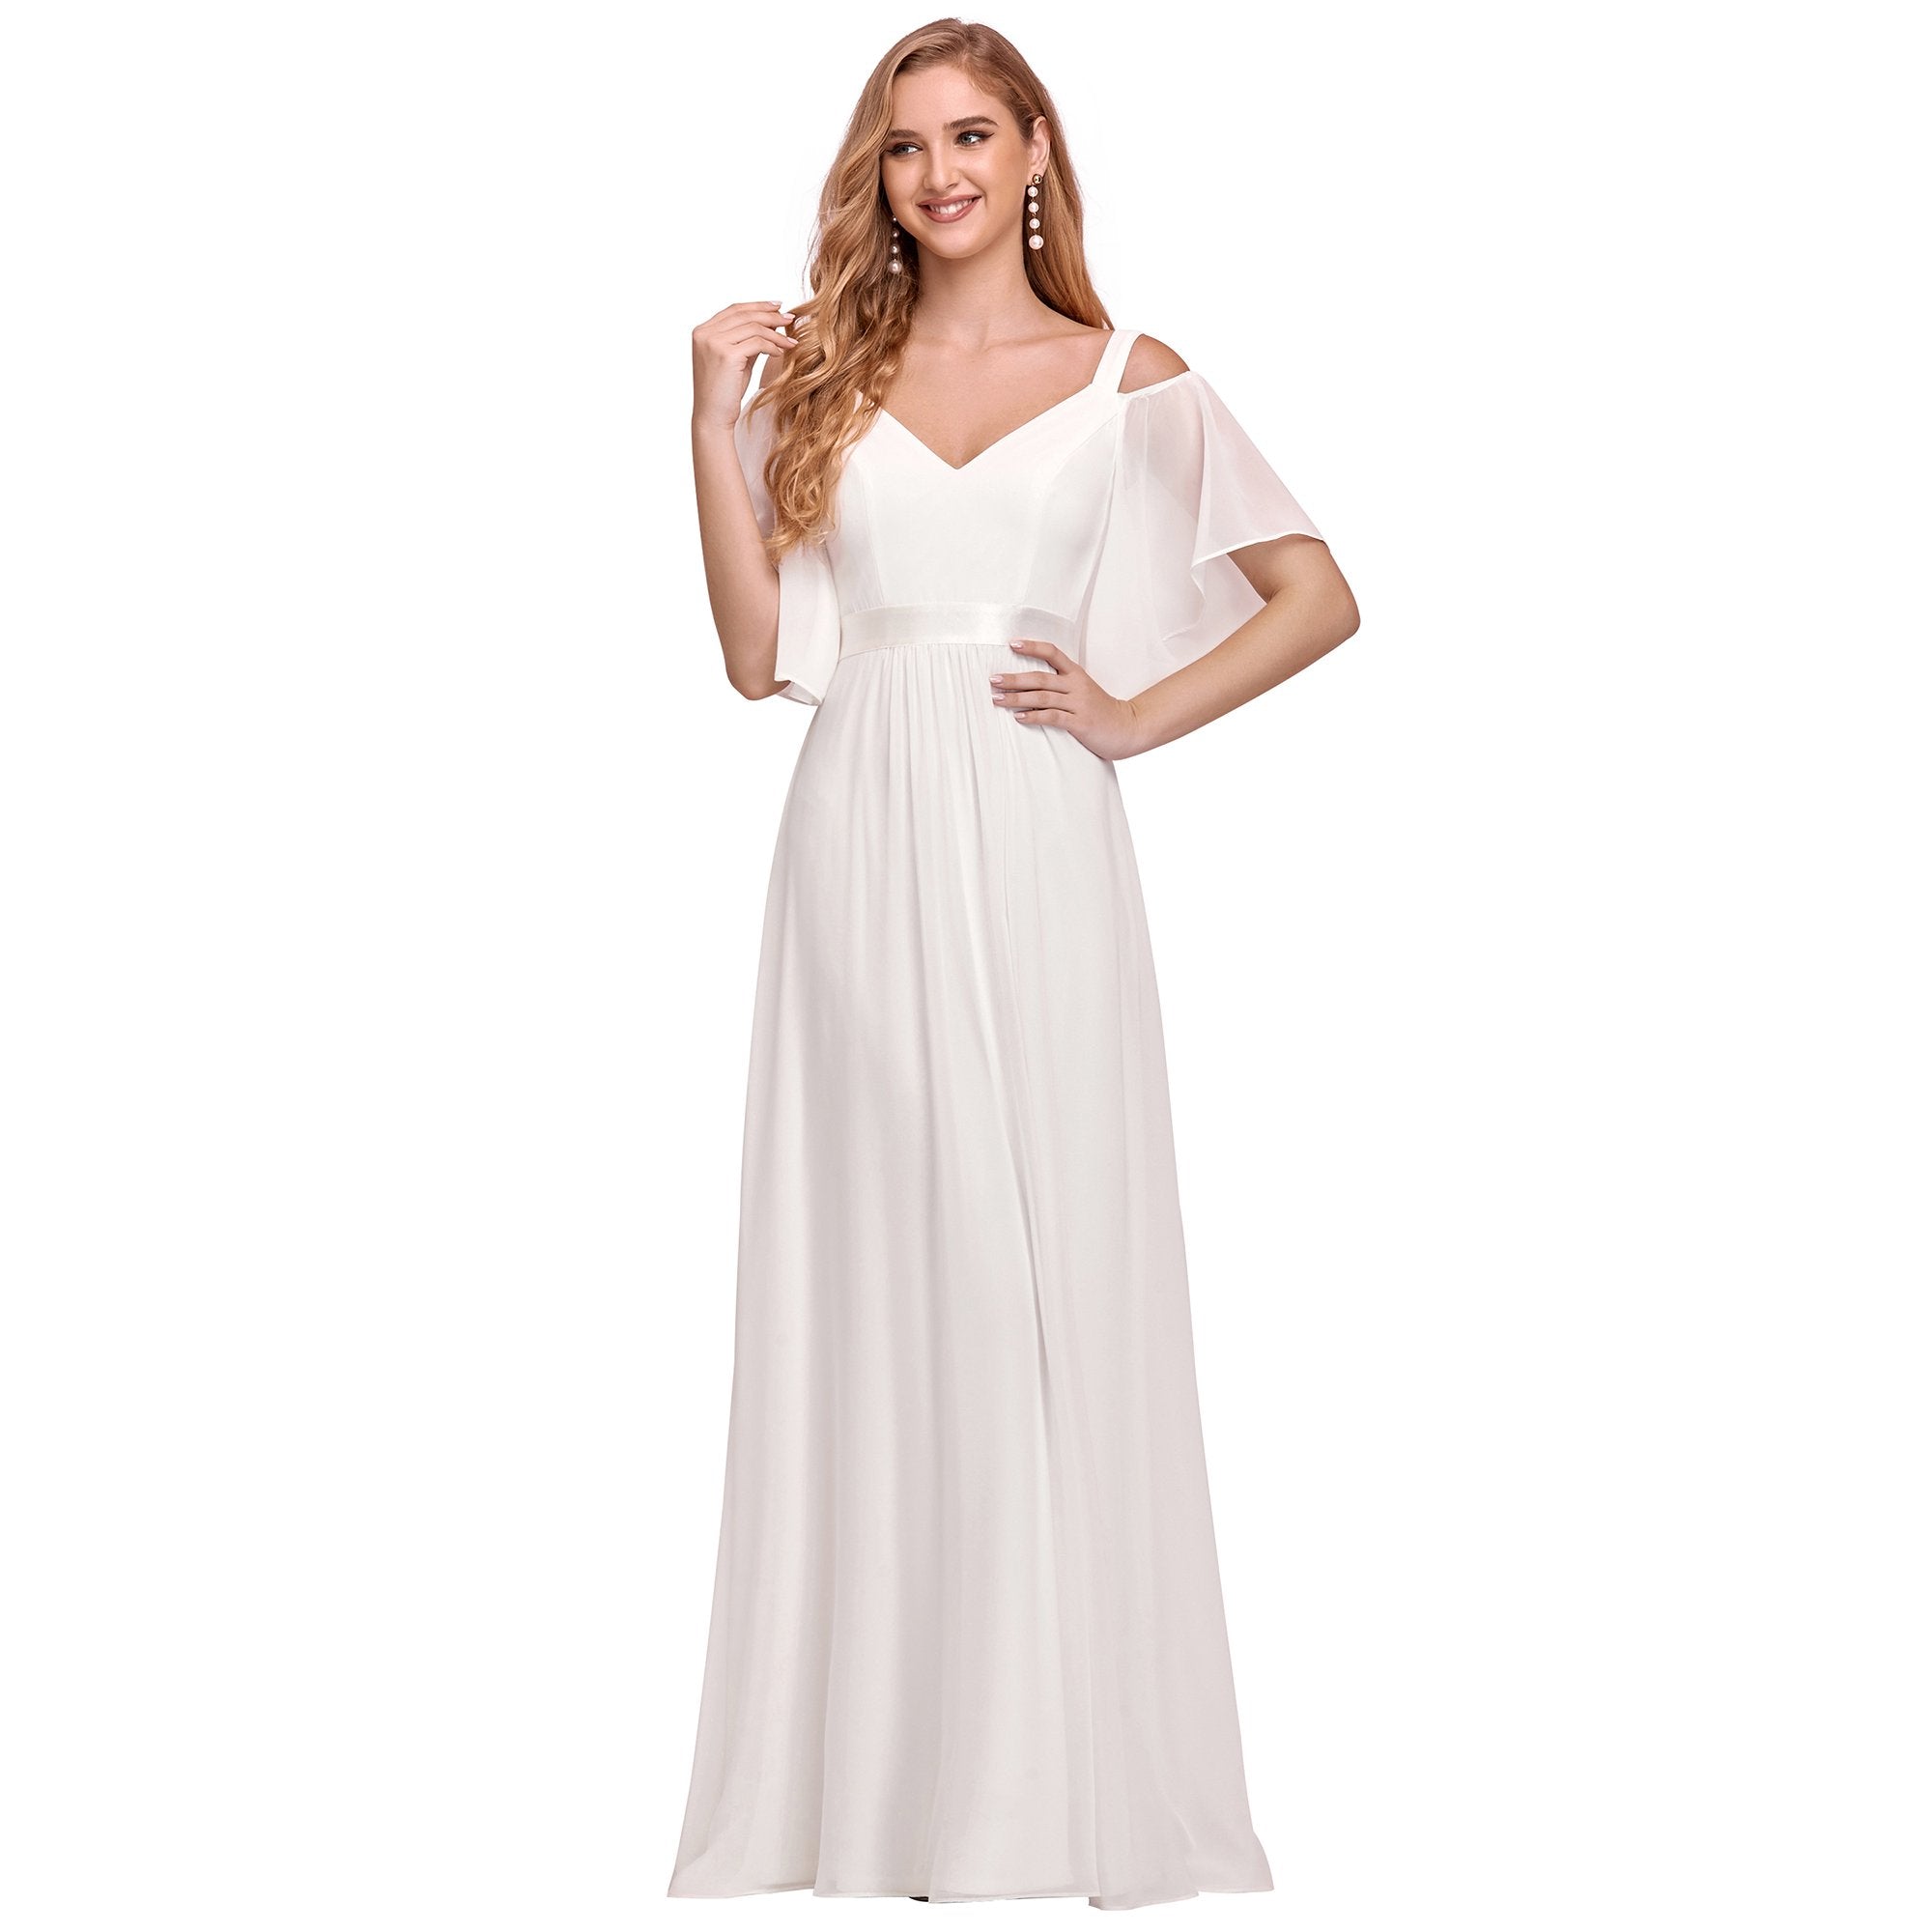 Women's Cold Shoulder Chiffon Bridesmaid Dress with Ruffle Sleeves Multi-colors Party Dresses